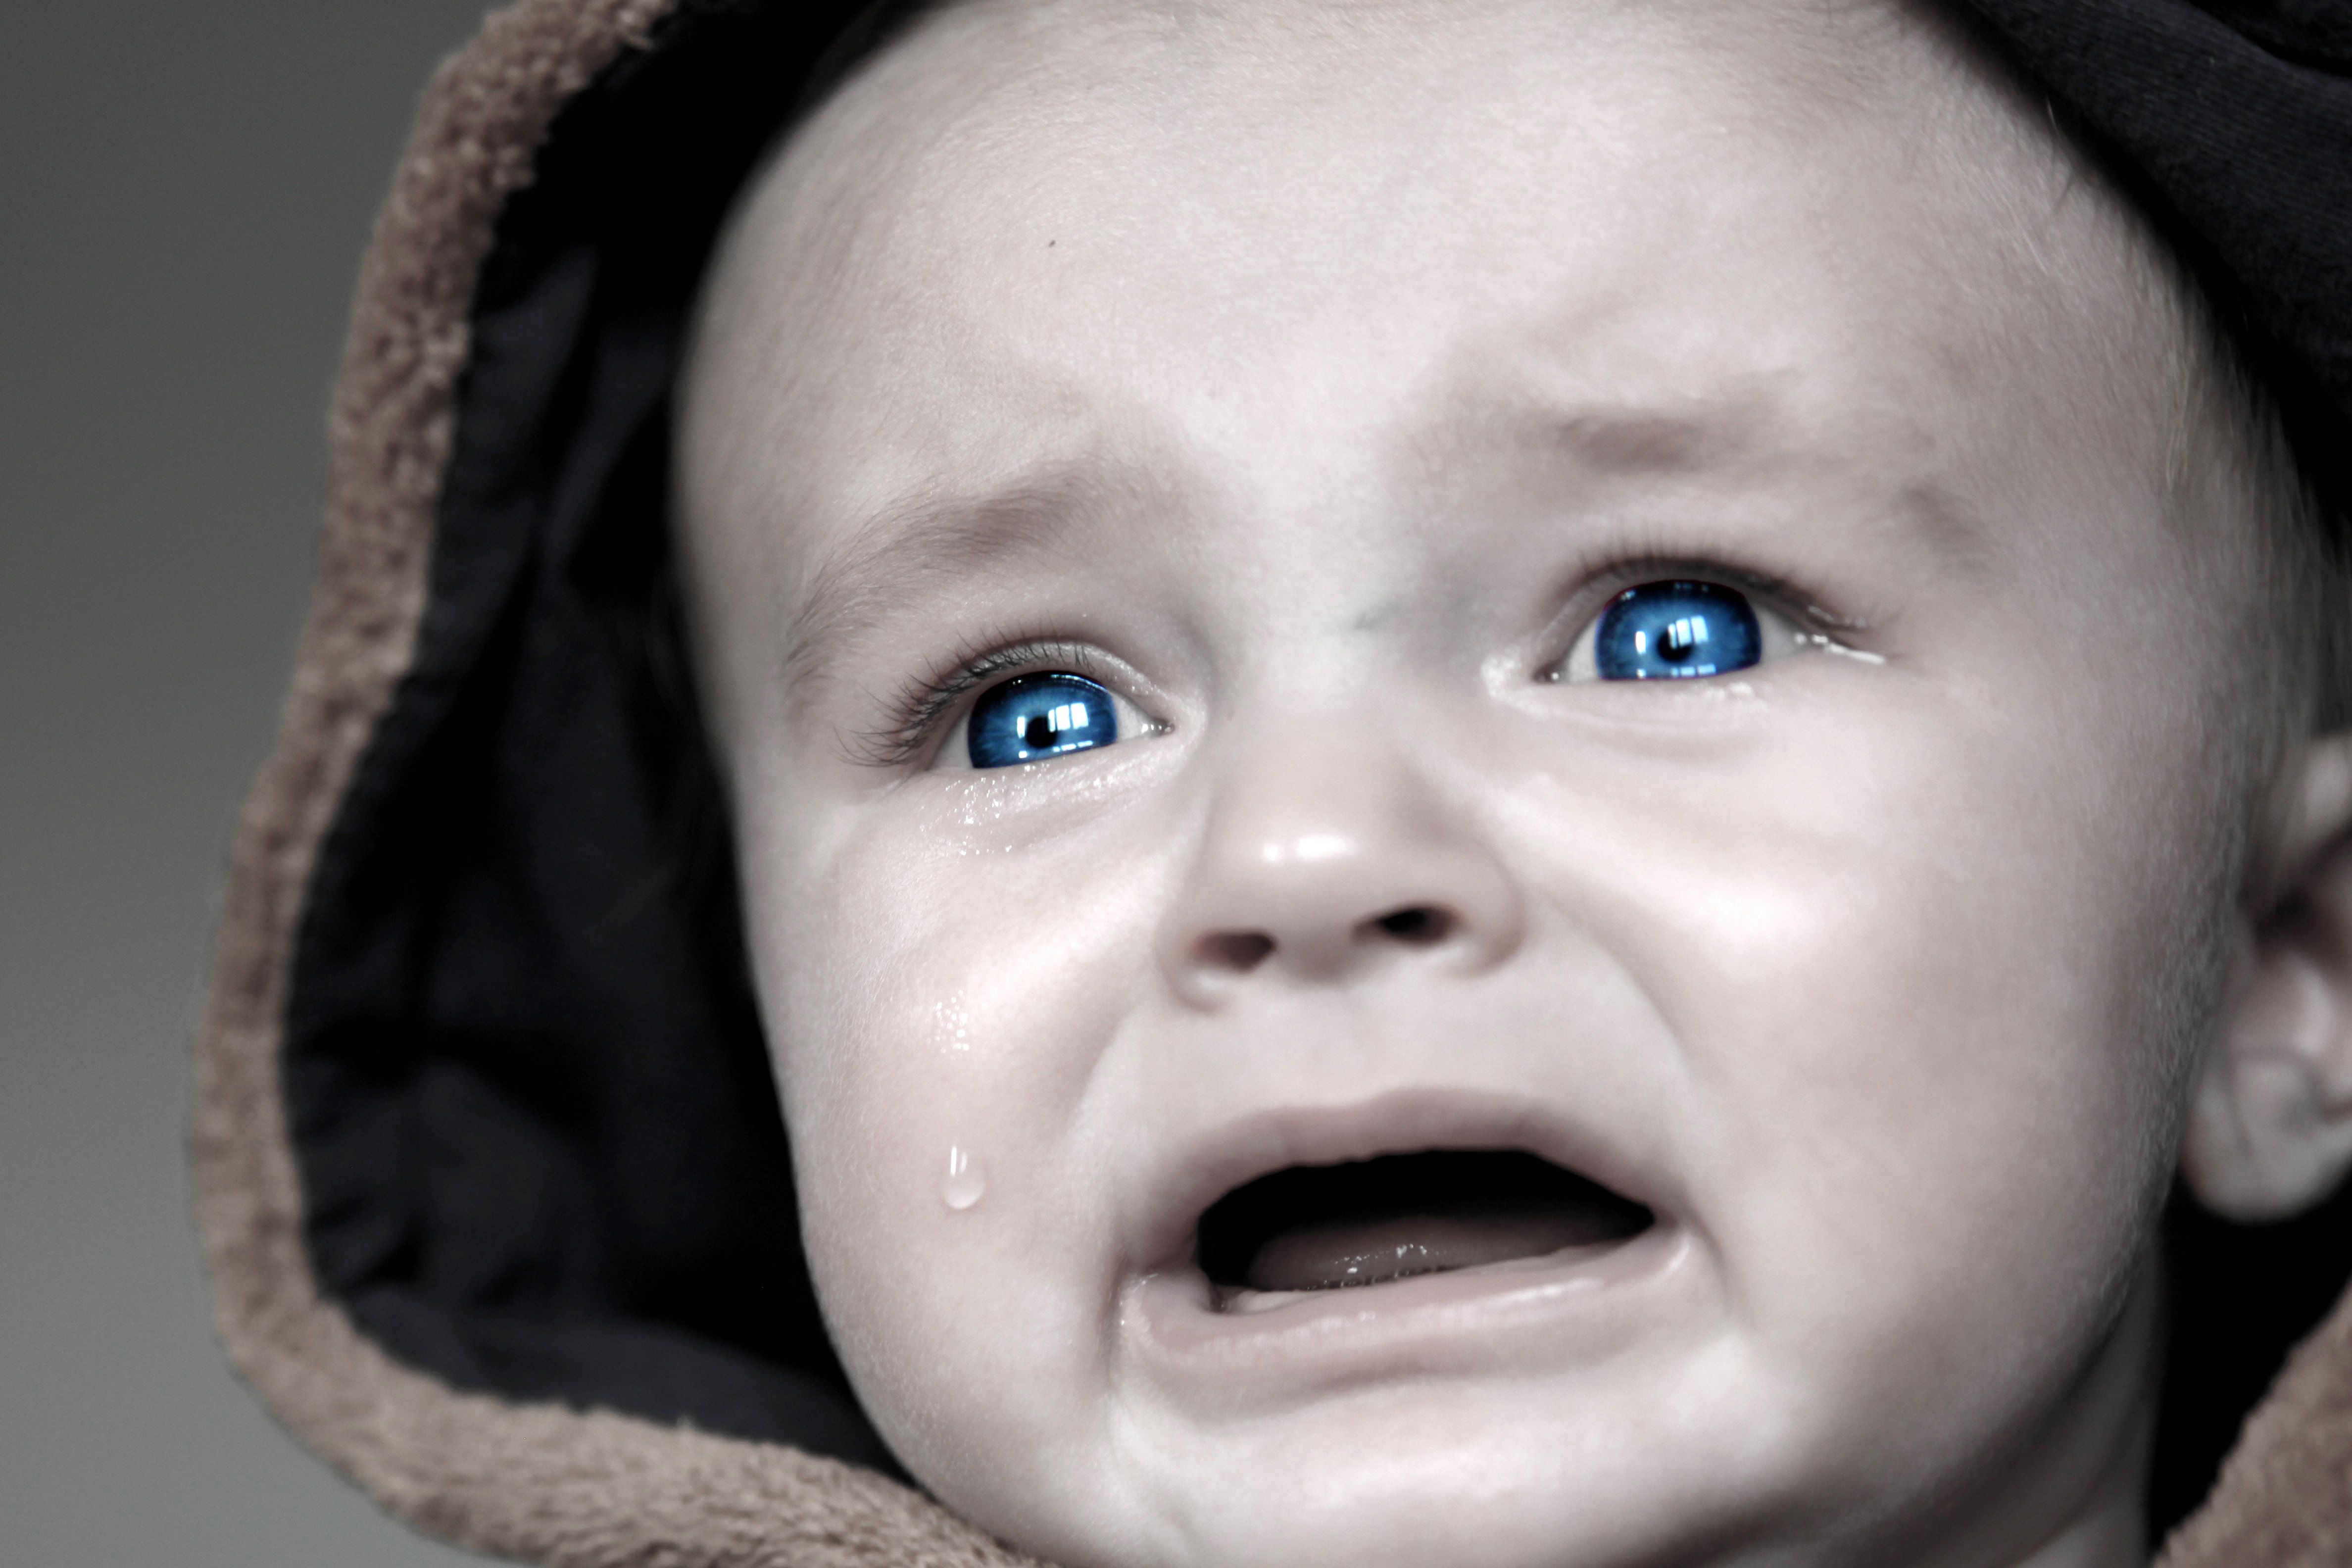 Teardrop From Crying Baby With Blue Eyes Image Domain Photo